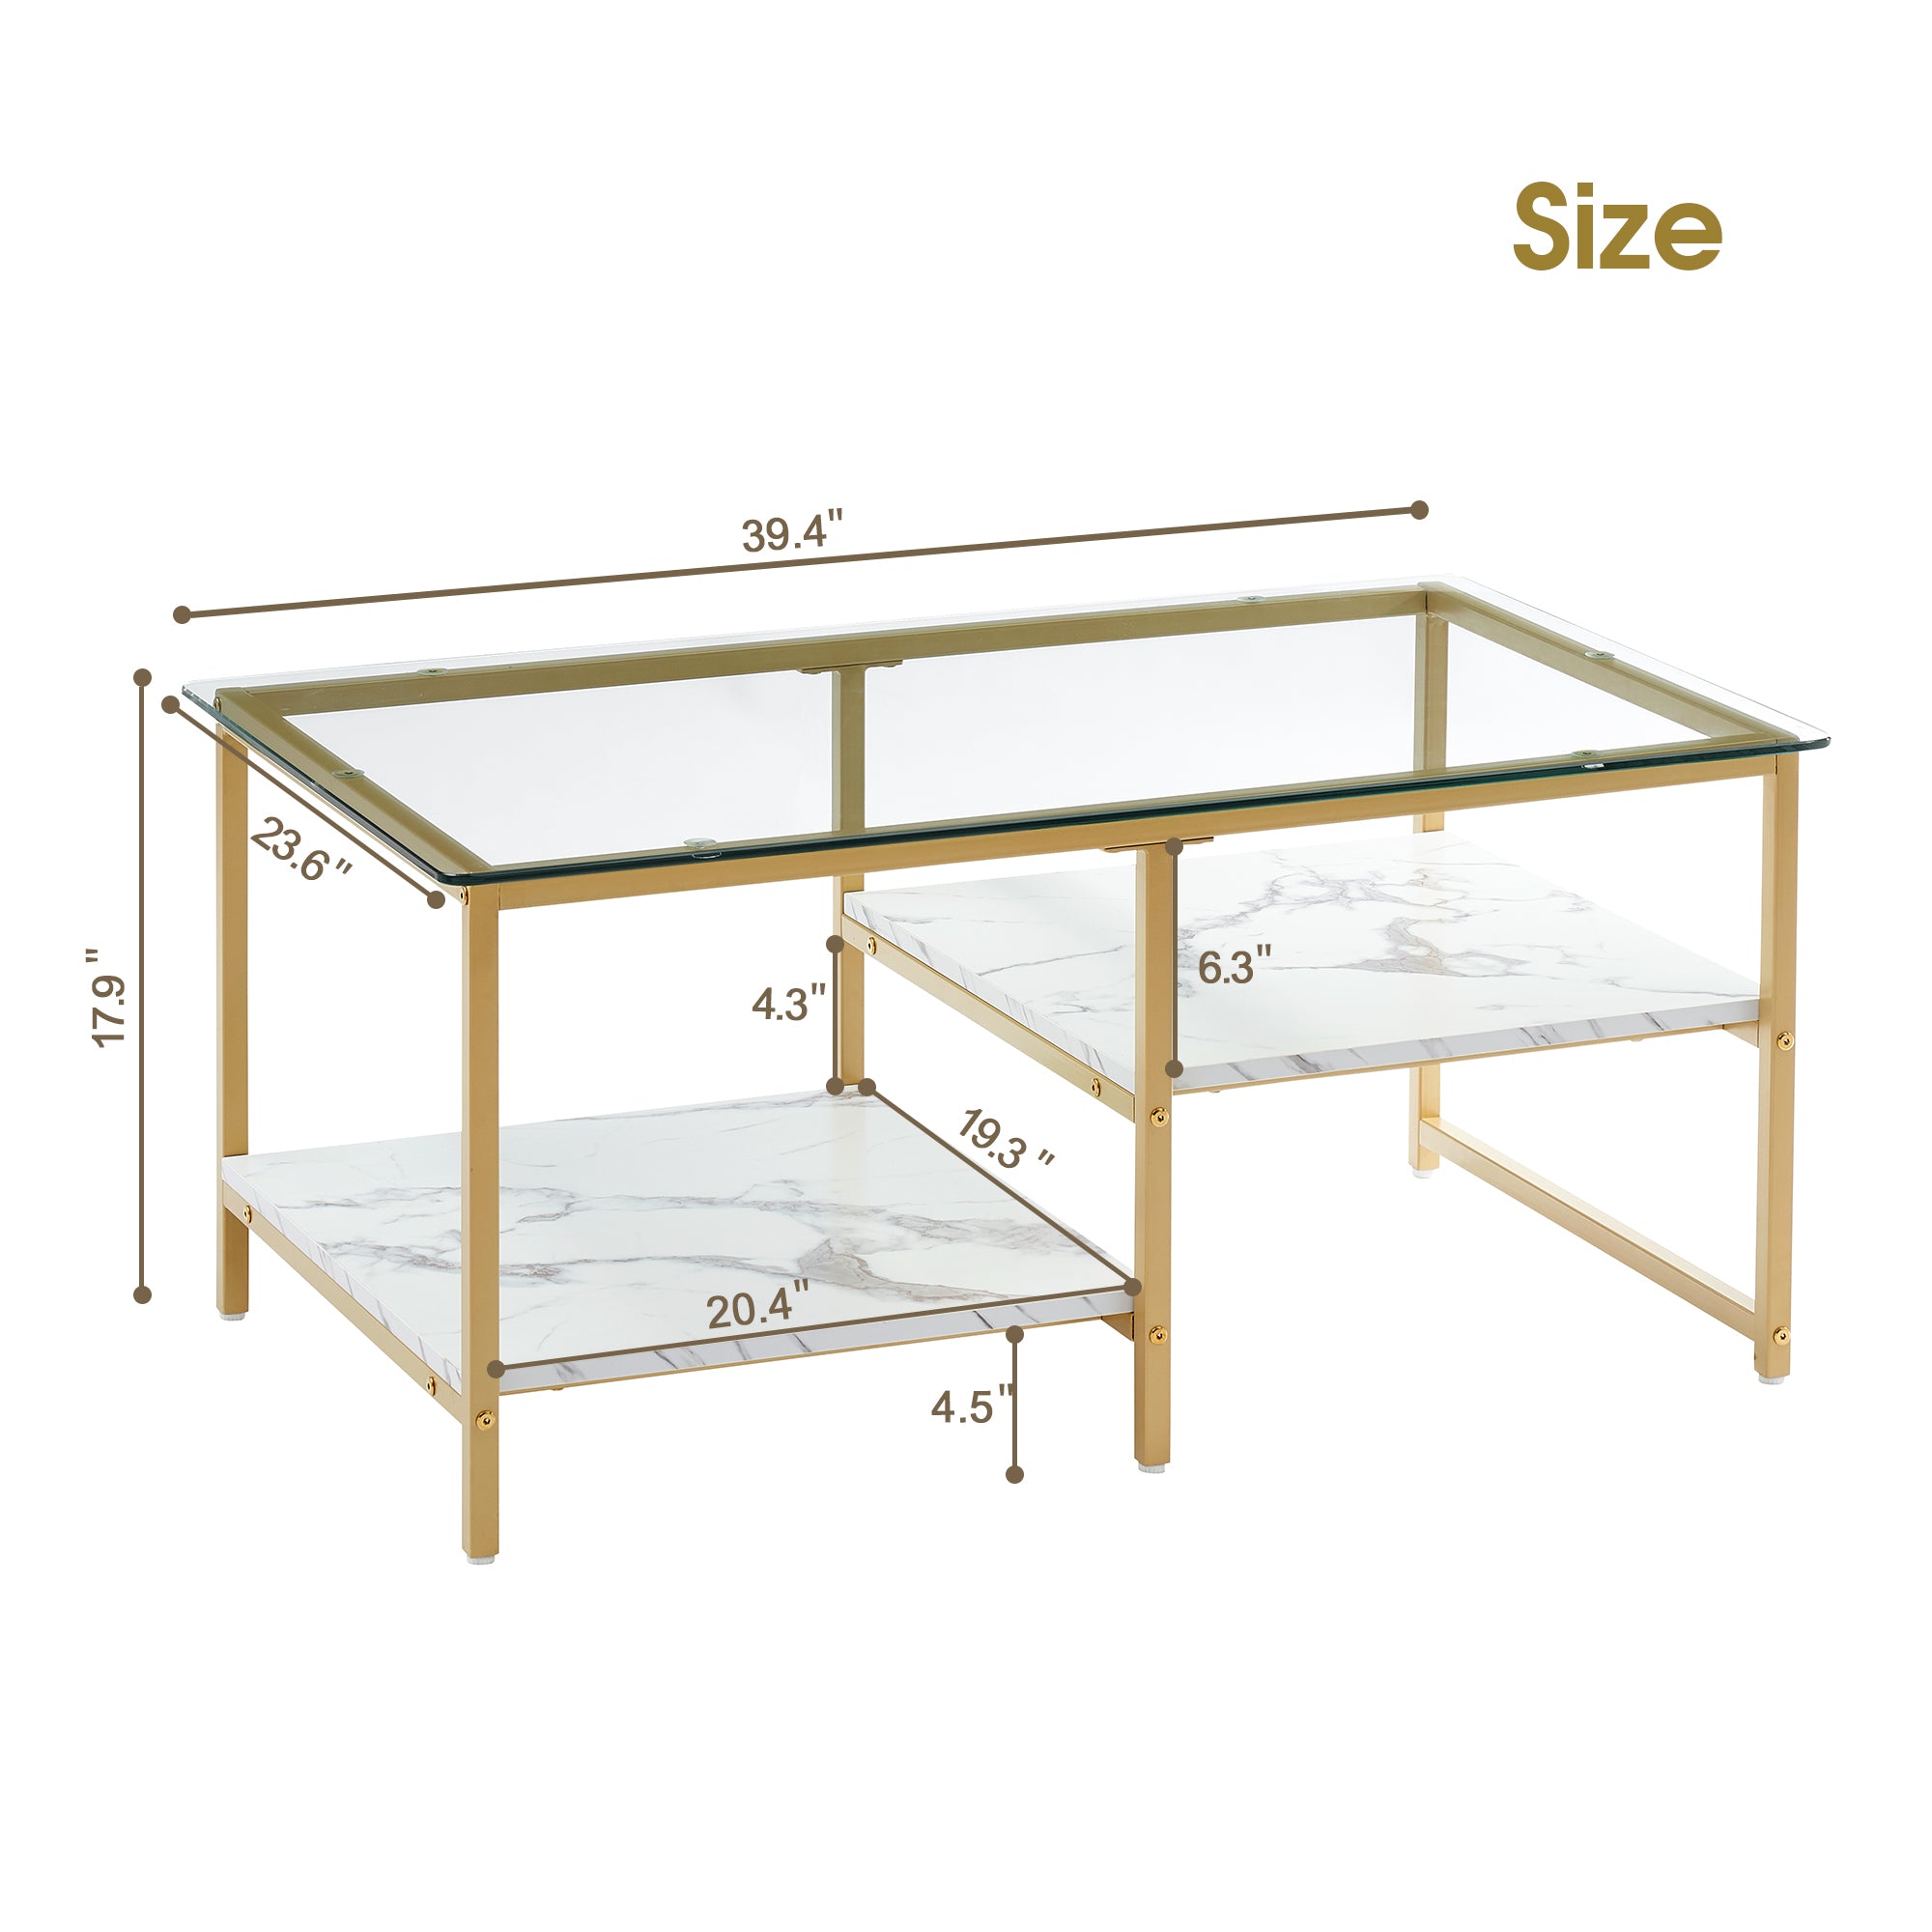 ivinta Rectangular Coffee Table, Tempered Glass Top Coffee Table with Gold Metal Frame, Modern Coffee Table for Living Room